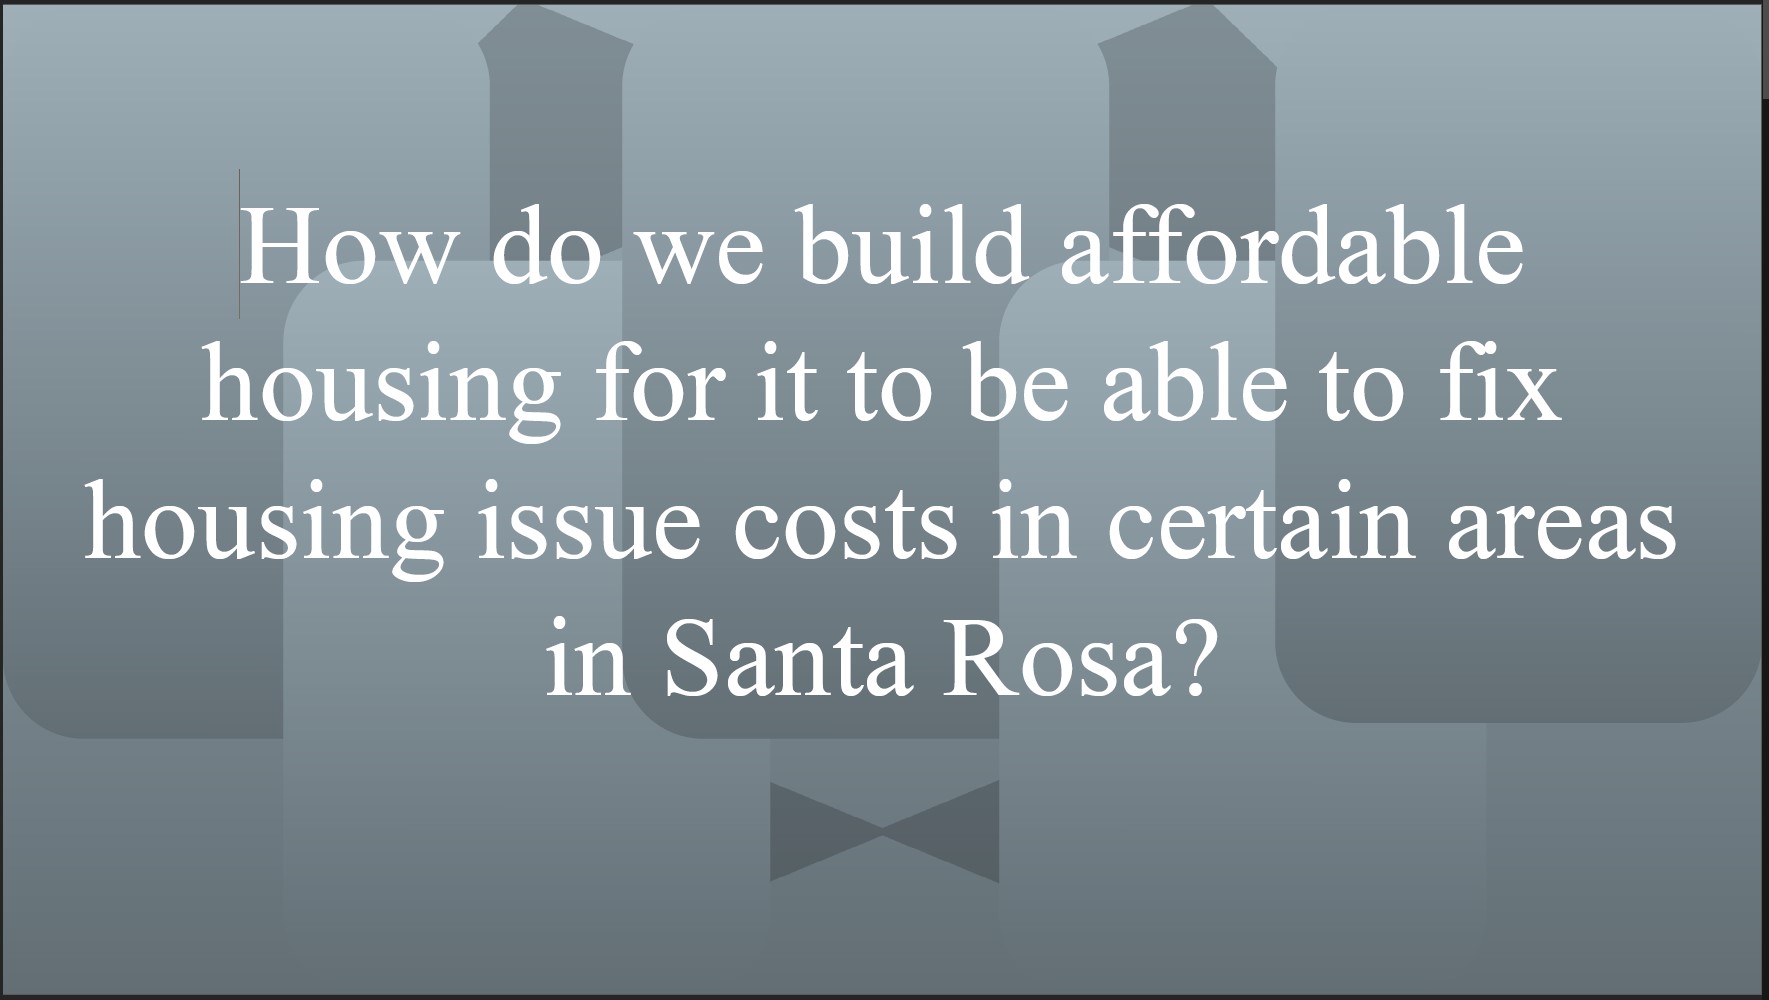 How do we build affordable housing for it to be able to fix housing issue costs in certain areasin Santa Rosa?